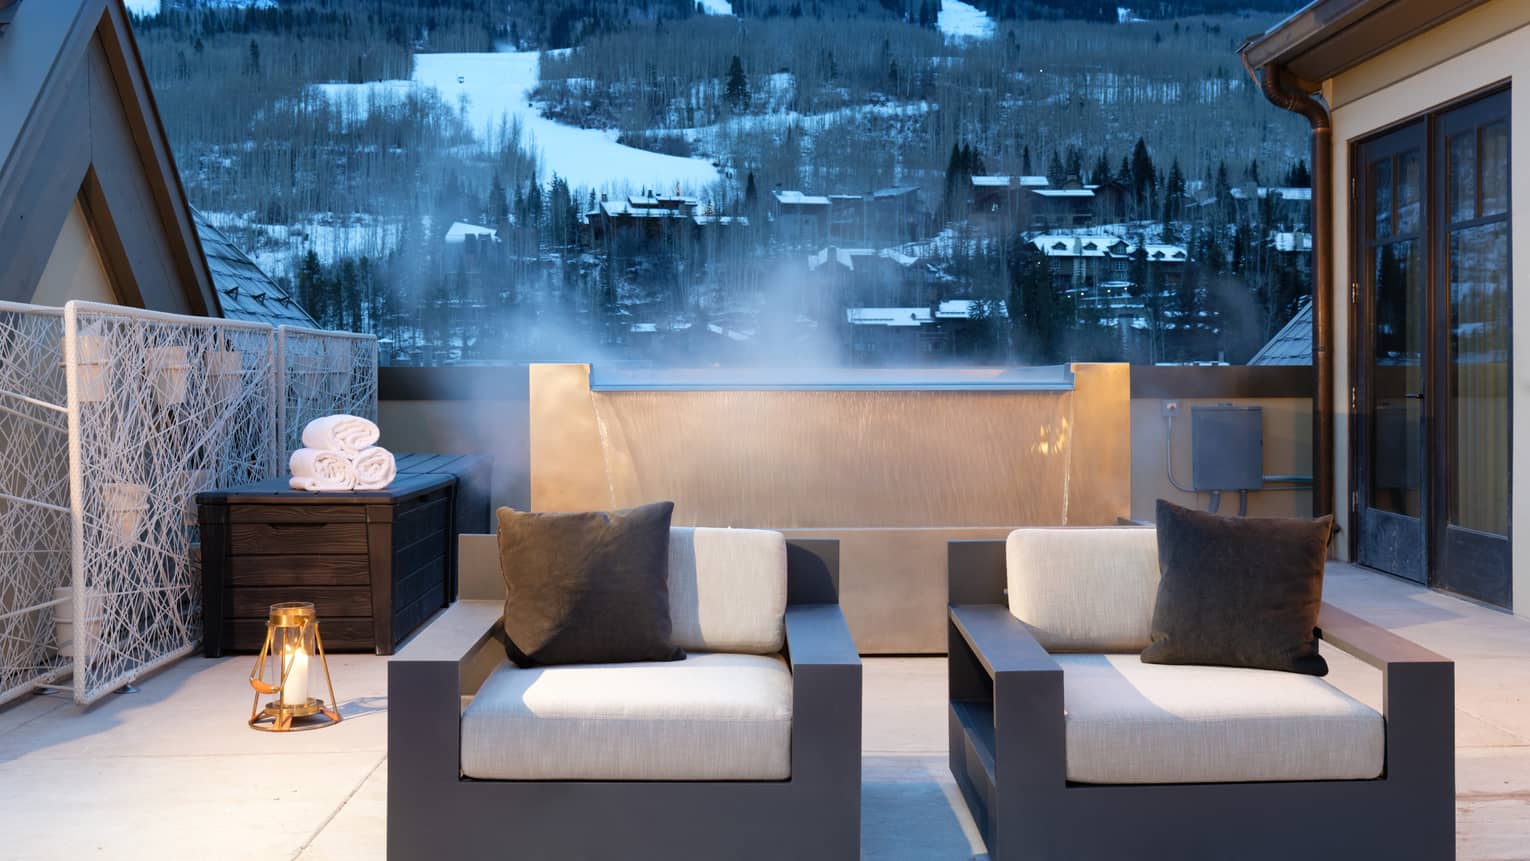 Plush patio armchairs in front of steaming fountain, snowy mountains in background